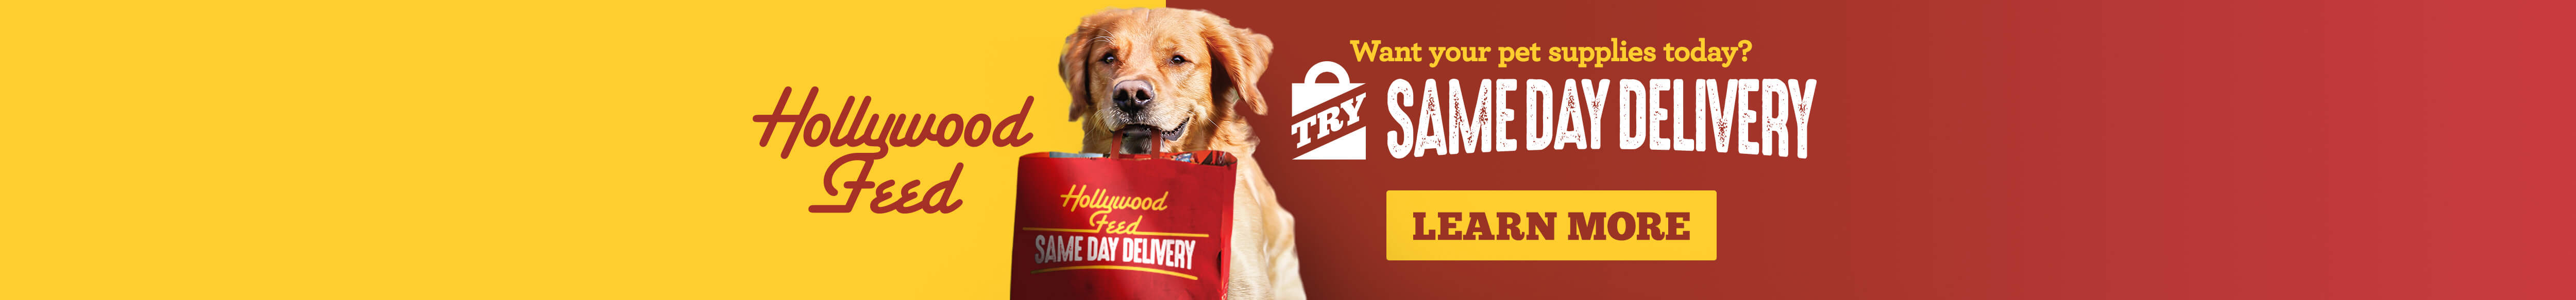 want your pet supplies today? Try Hollywood Feed Same Day Delivery. Click to Learn More